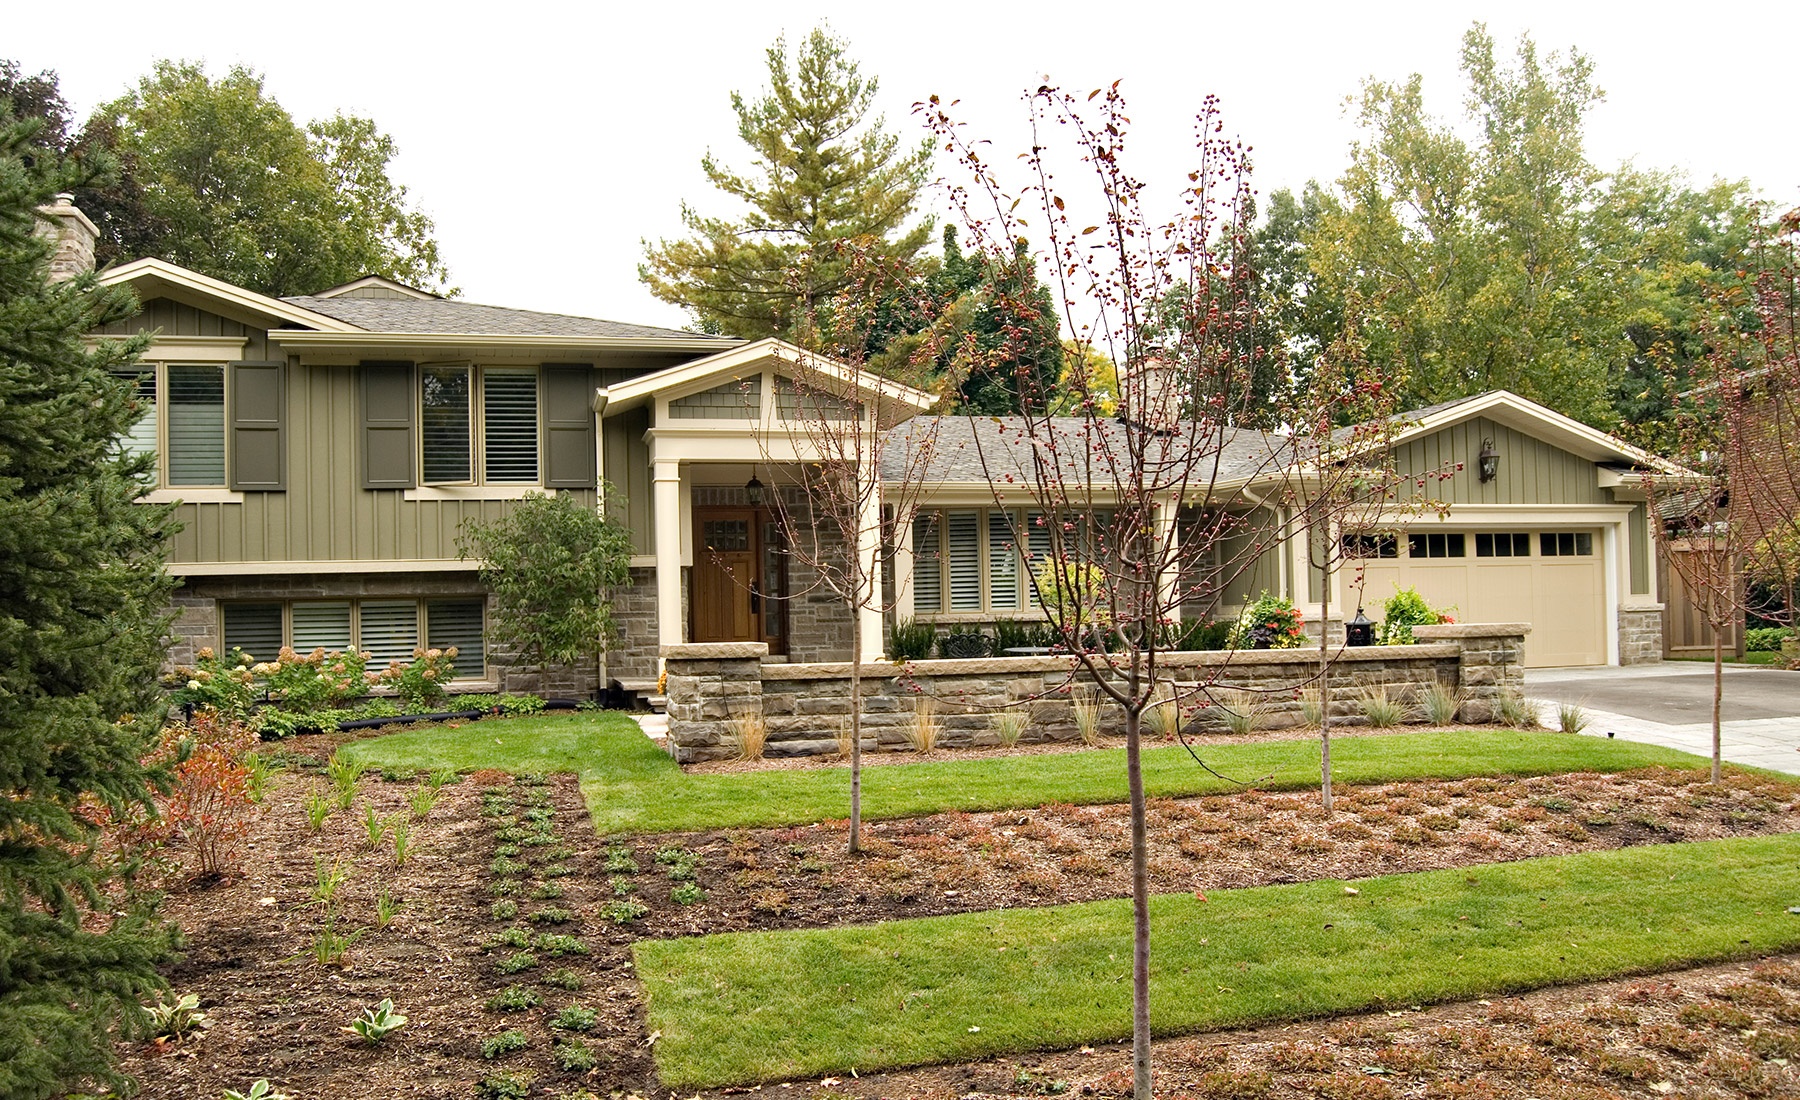 Mississauga renovation with wood siding, natural stone and shutters.